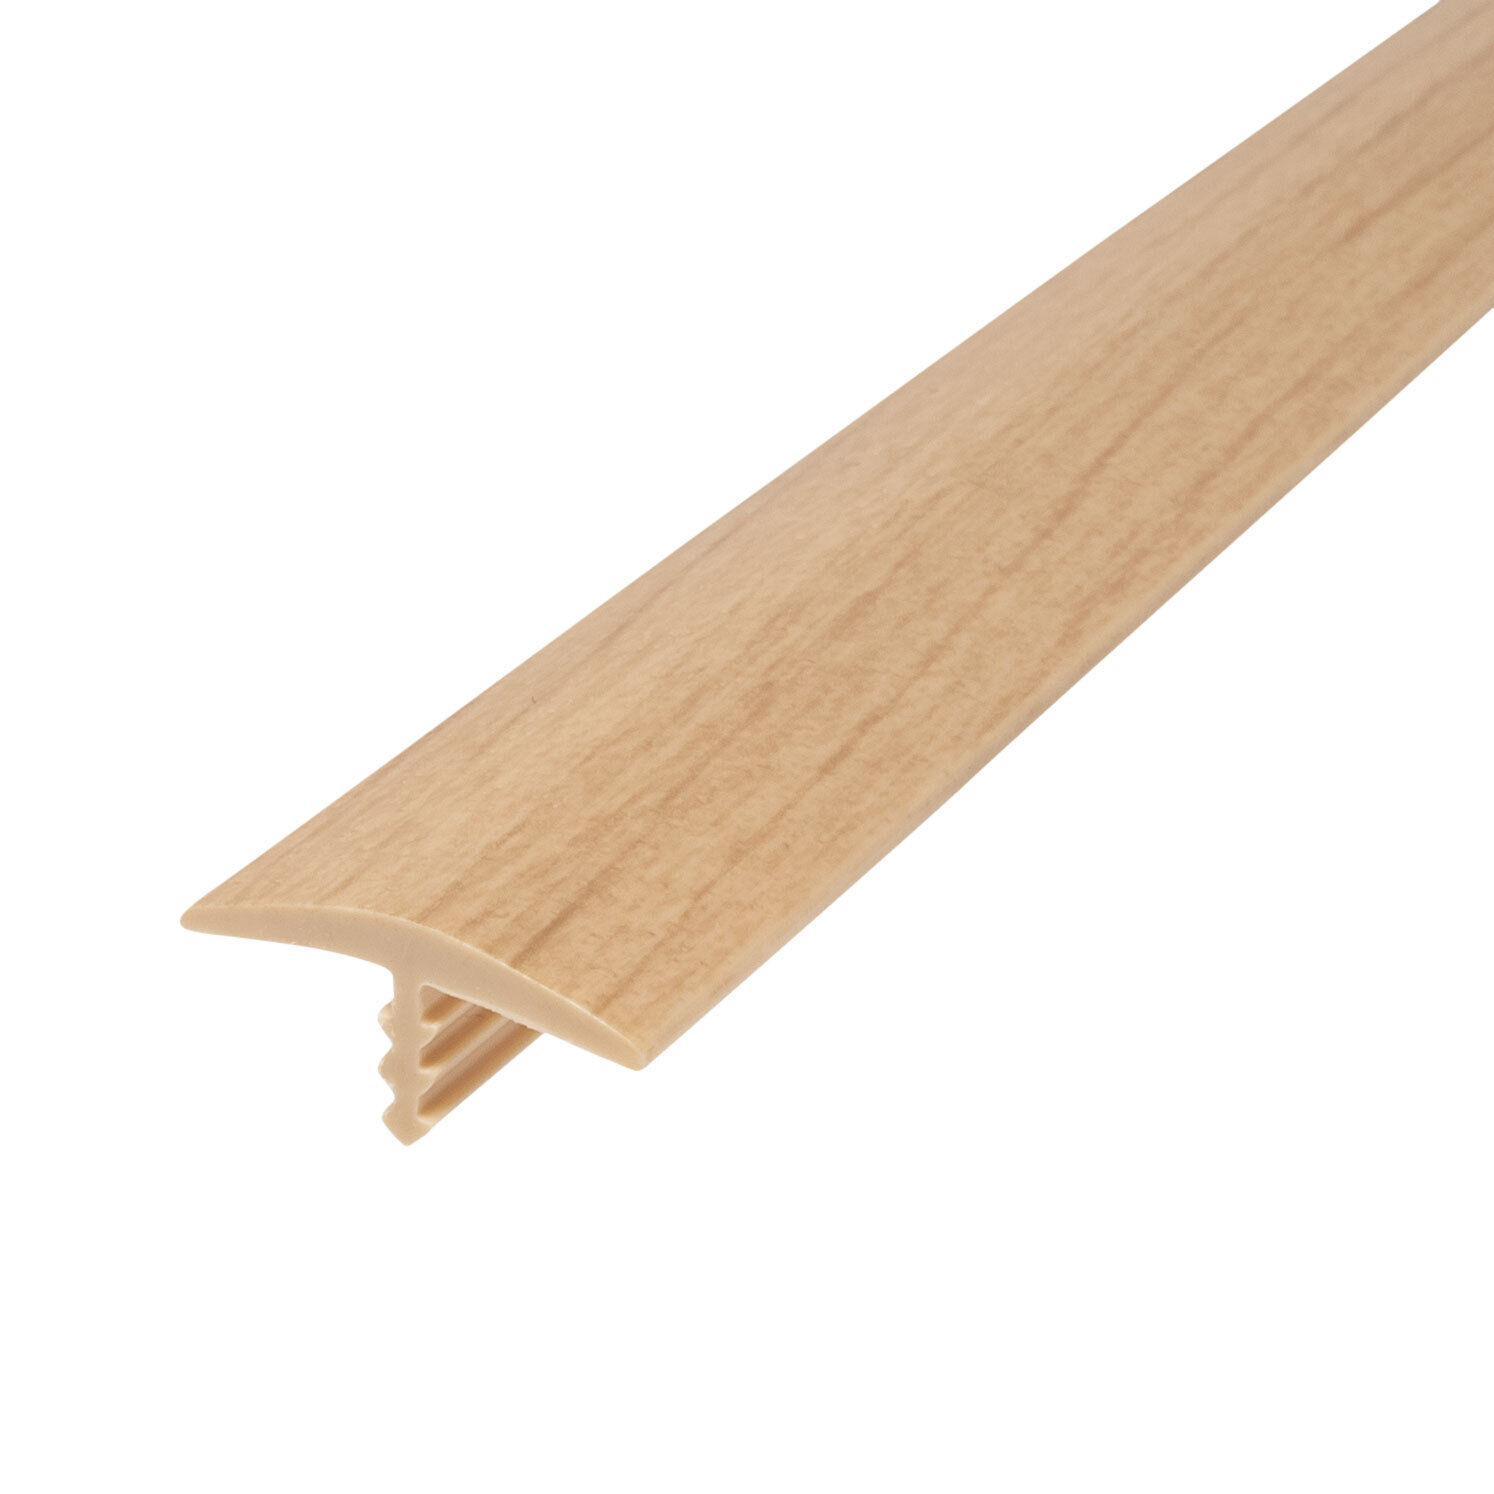 Outwater Plastic T-molding 7/8 Inch Natural Maple Woodgrain Flexible